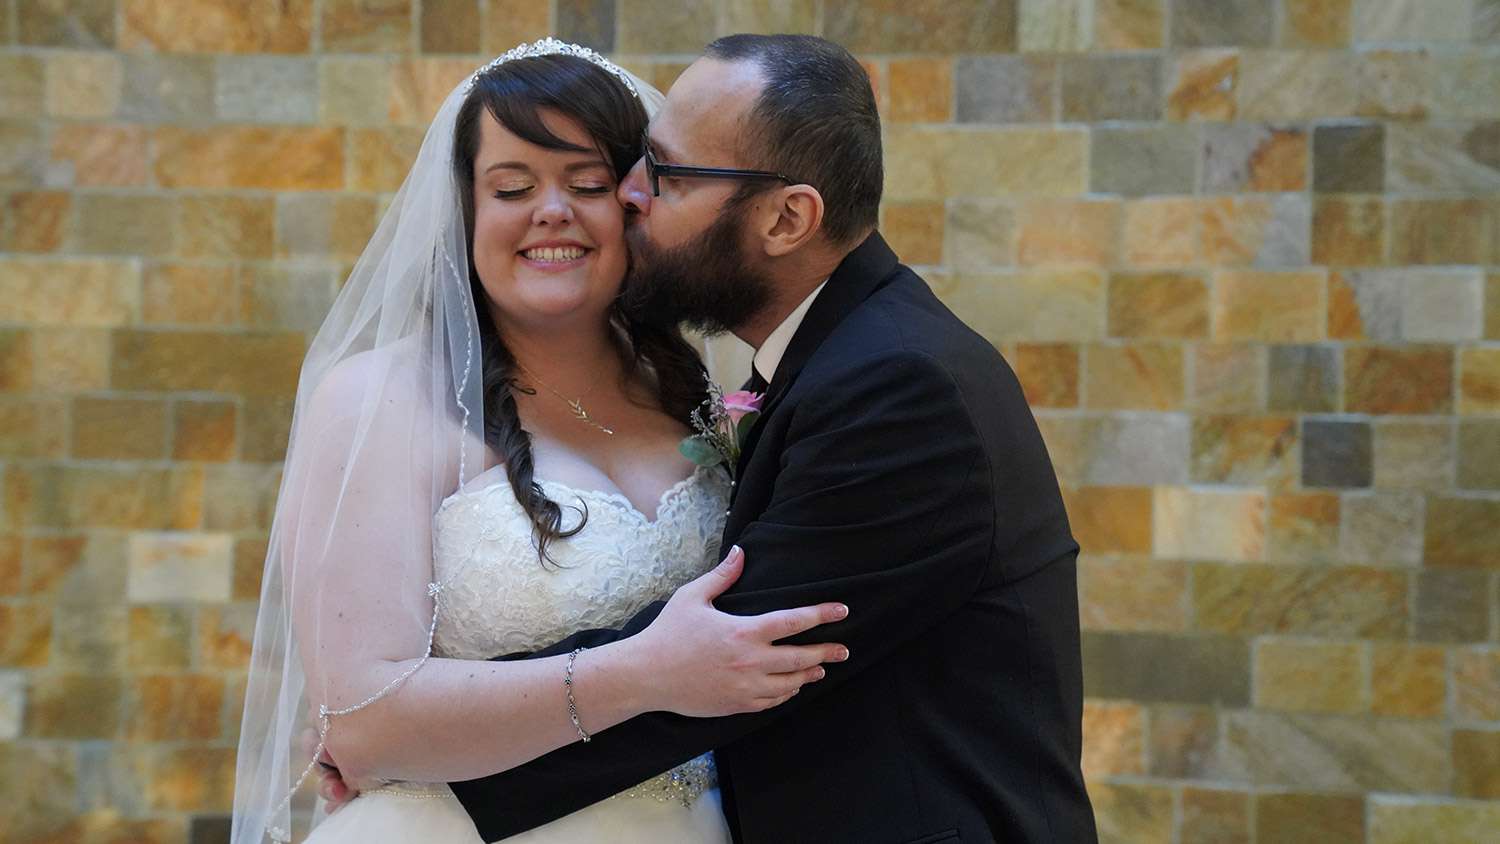 Wedding for Terminally Ill Patient